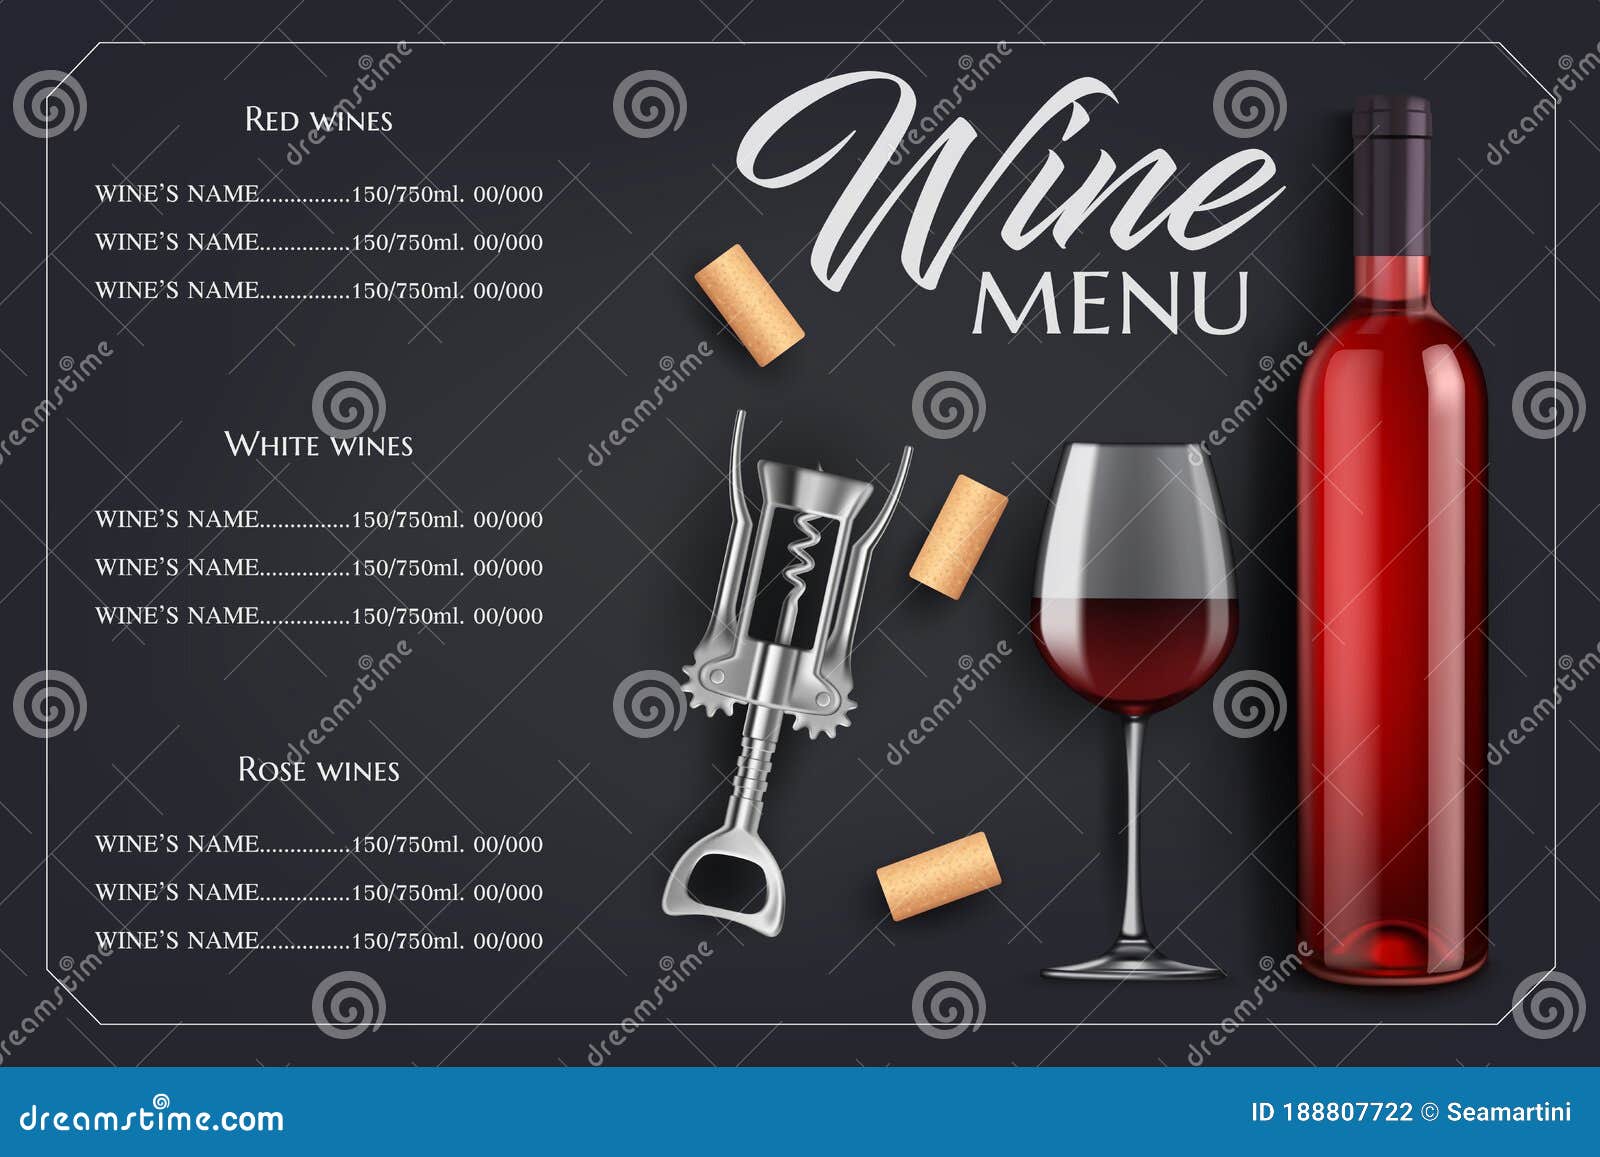 Wine Menu List Vector Template with Bottle, Glass Stock Vector Throughout Free Wine Menu Template